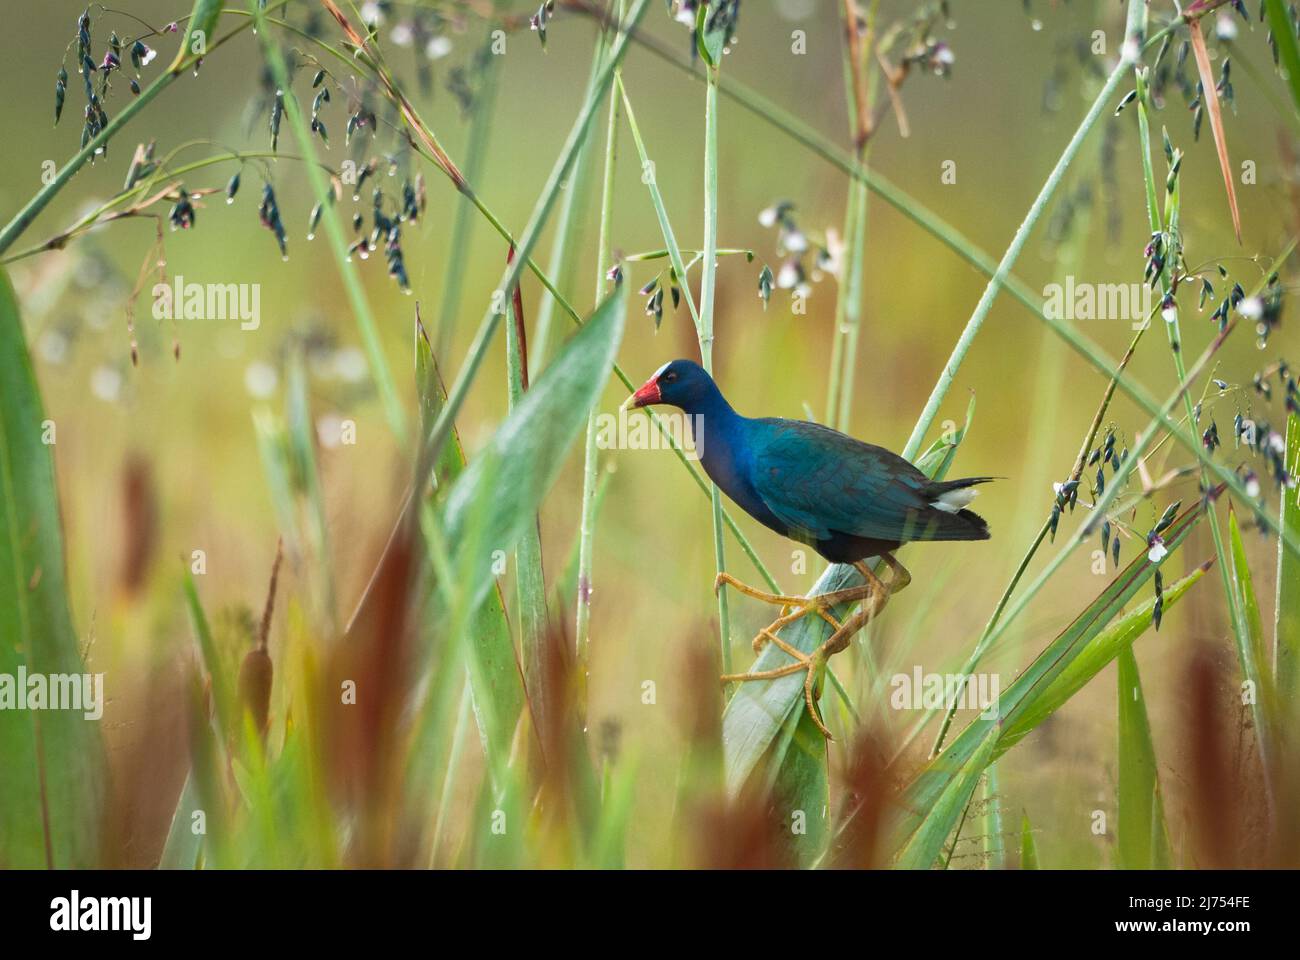 A Purple Gallinule (Porphyrio martinica) at a wetland from SE Brazil Stock Photo